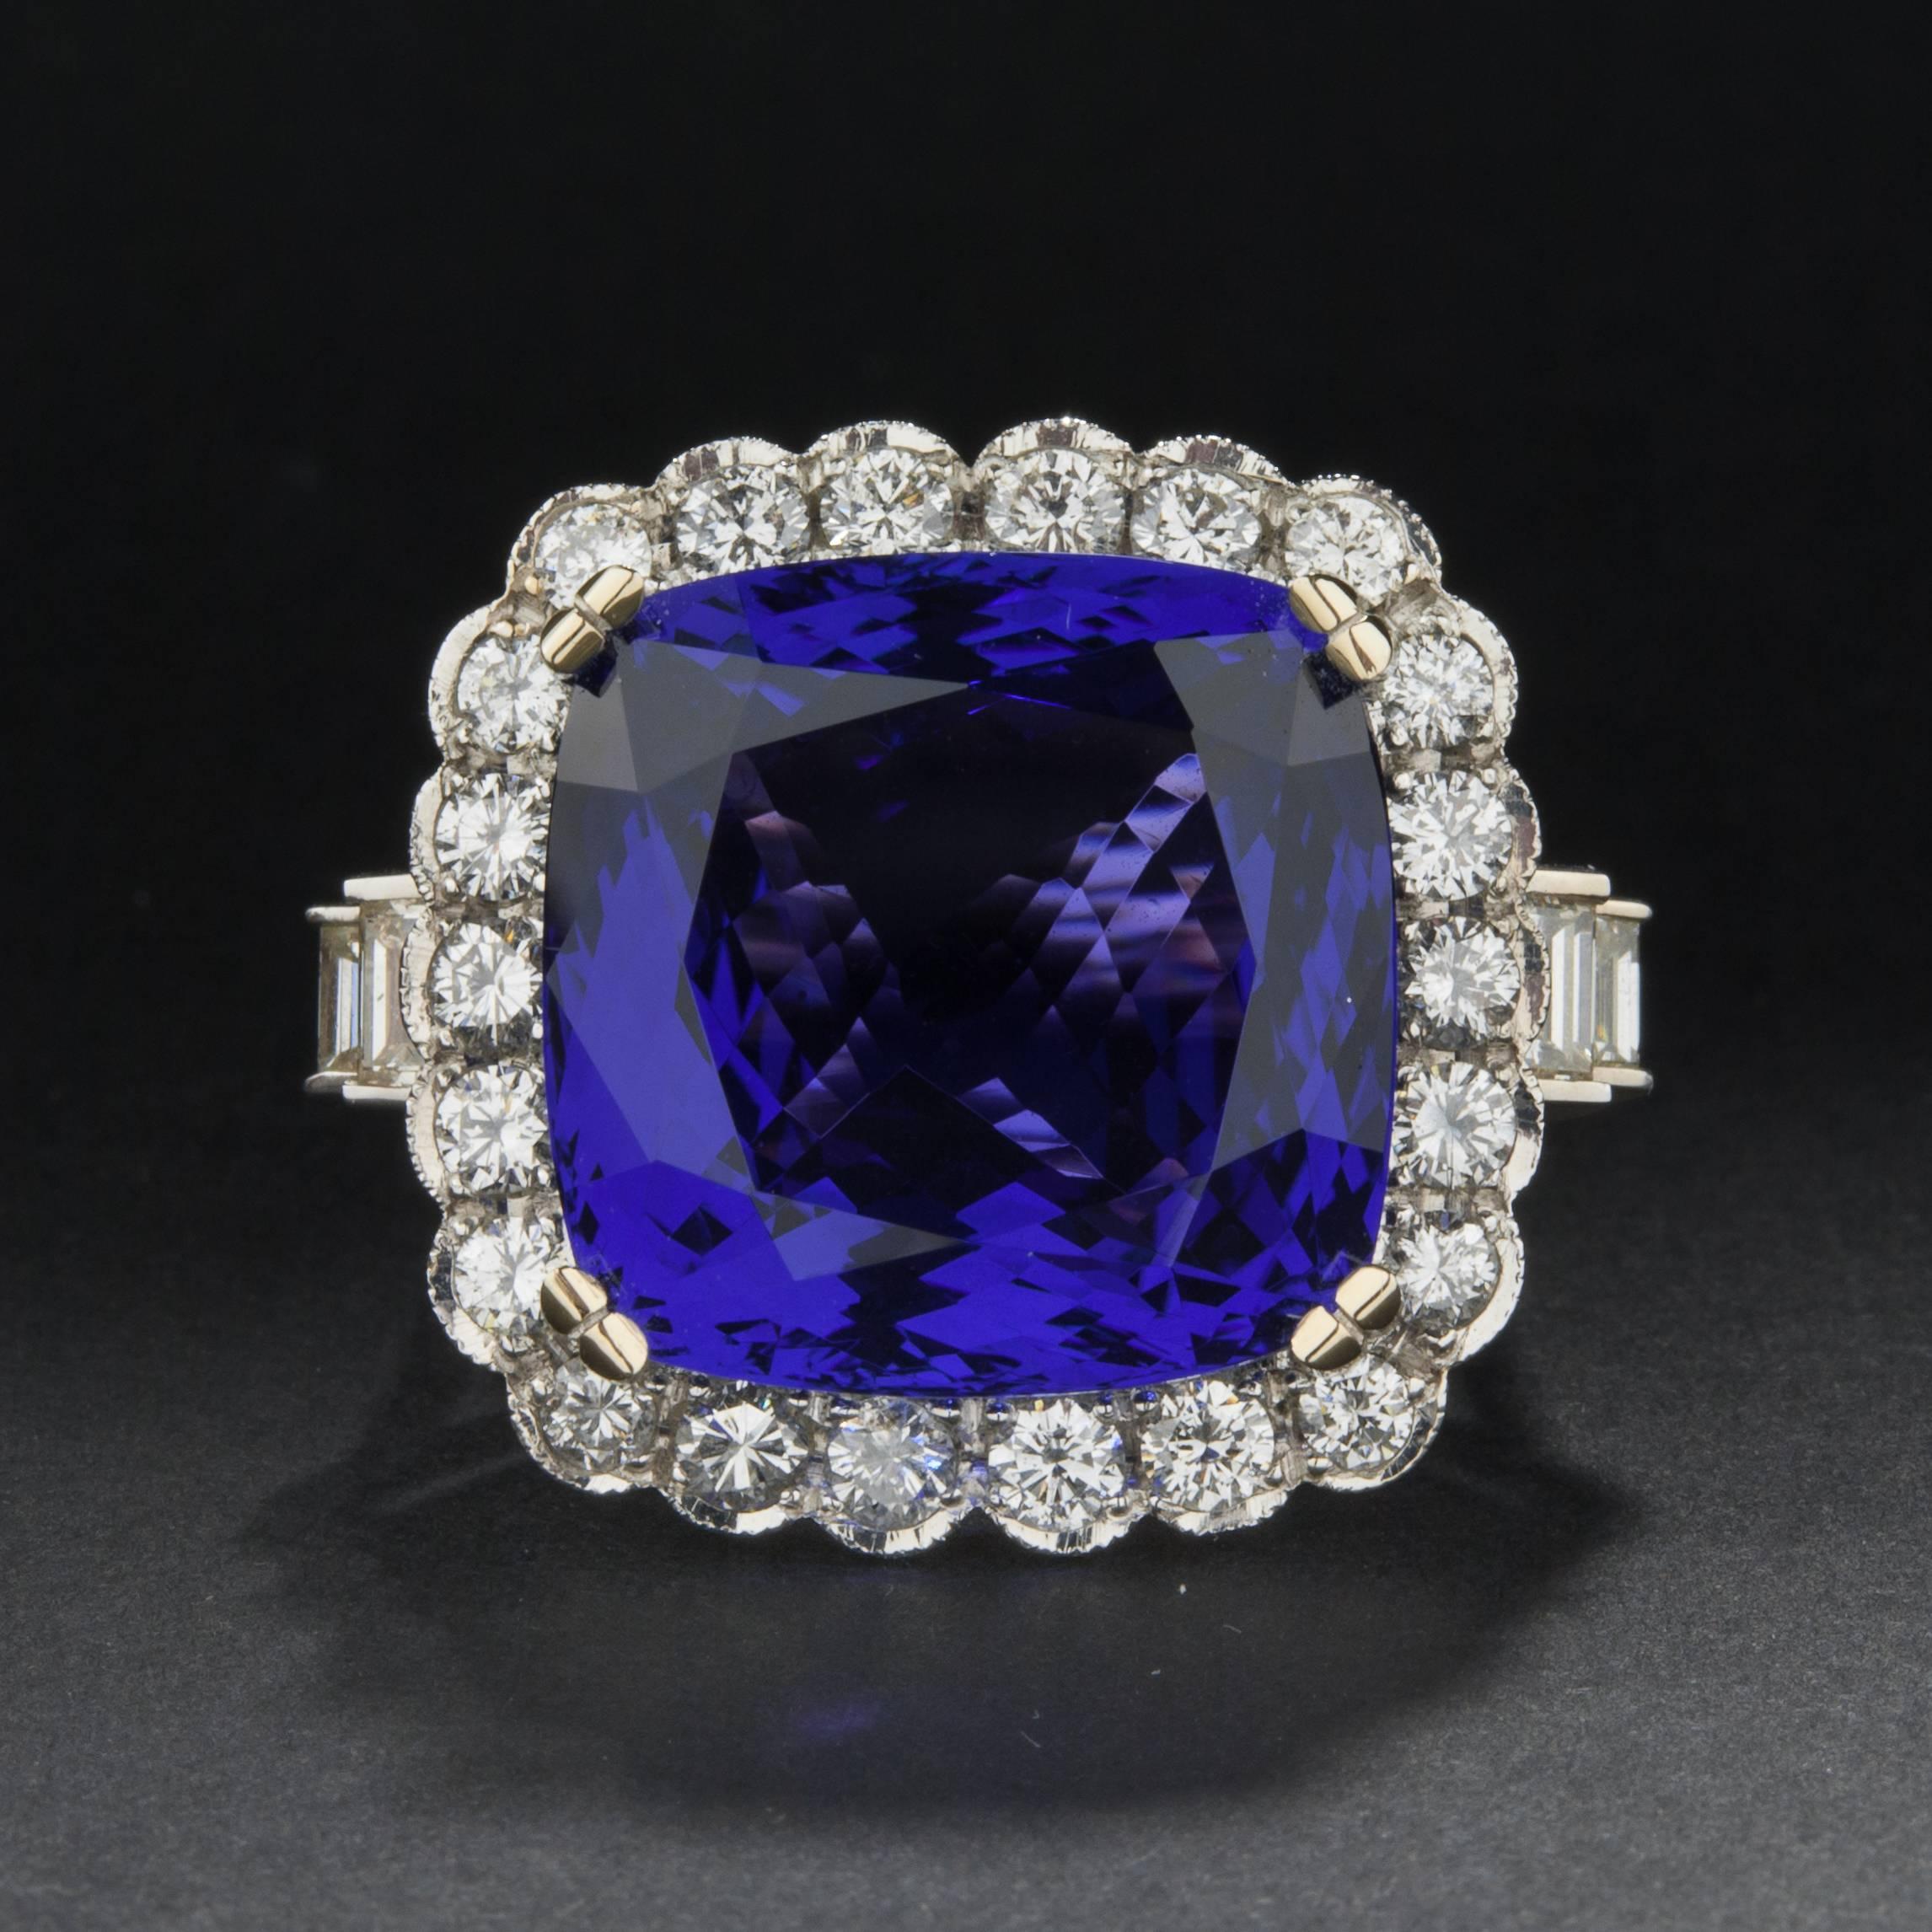 An absolutely stunning 24.59 carat tanzanite ring. The massive center stone is mouted in an 18k white gold setting and accented by approximately 2.00 total carats of diamonds. The ring is 23mm wide and it is currently size 7.